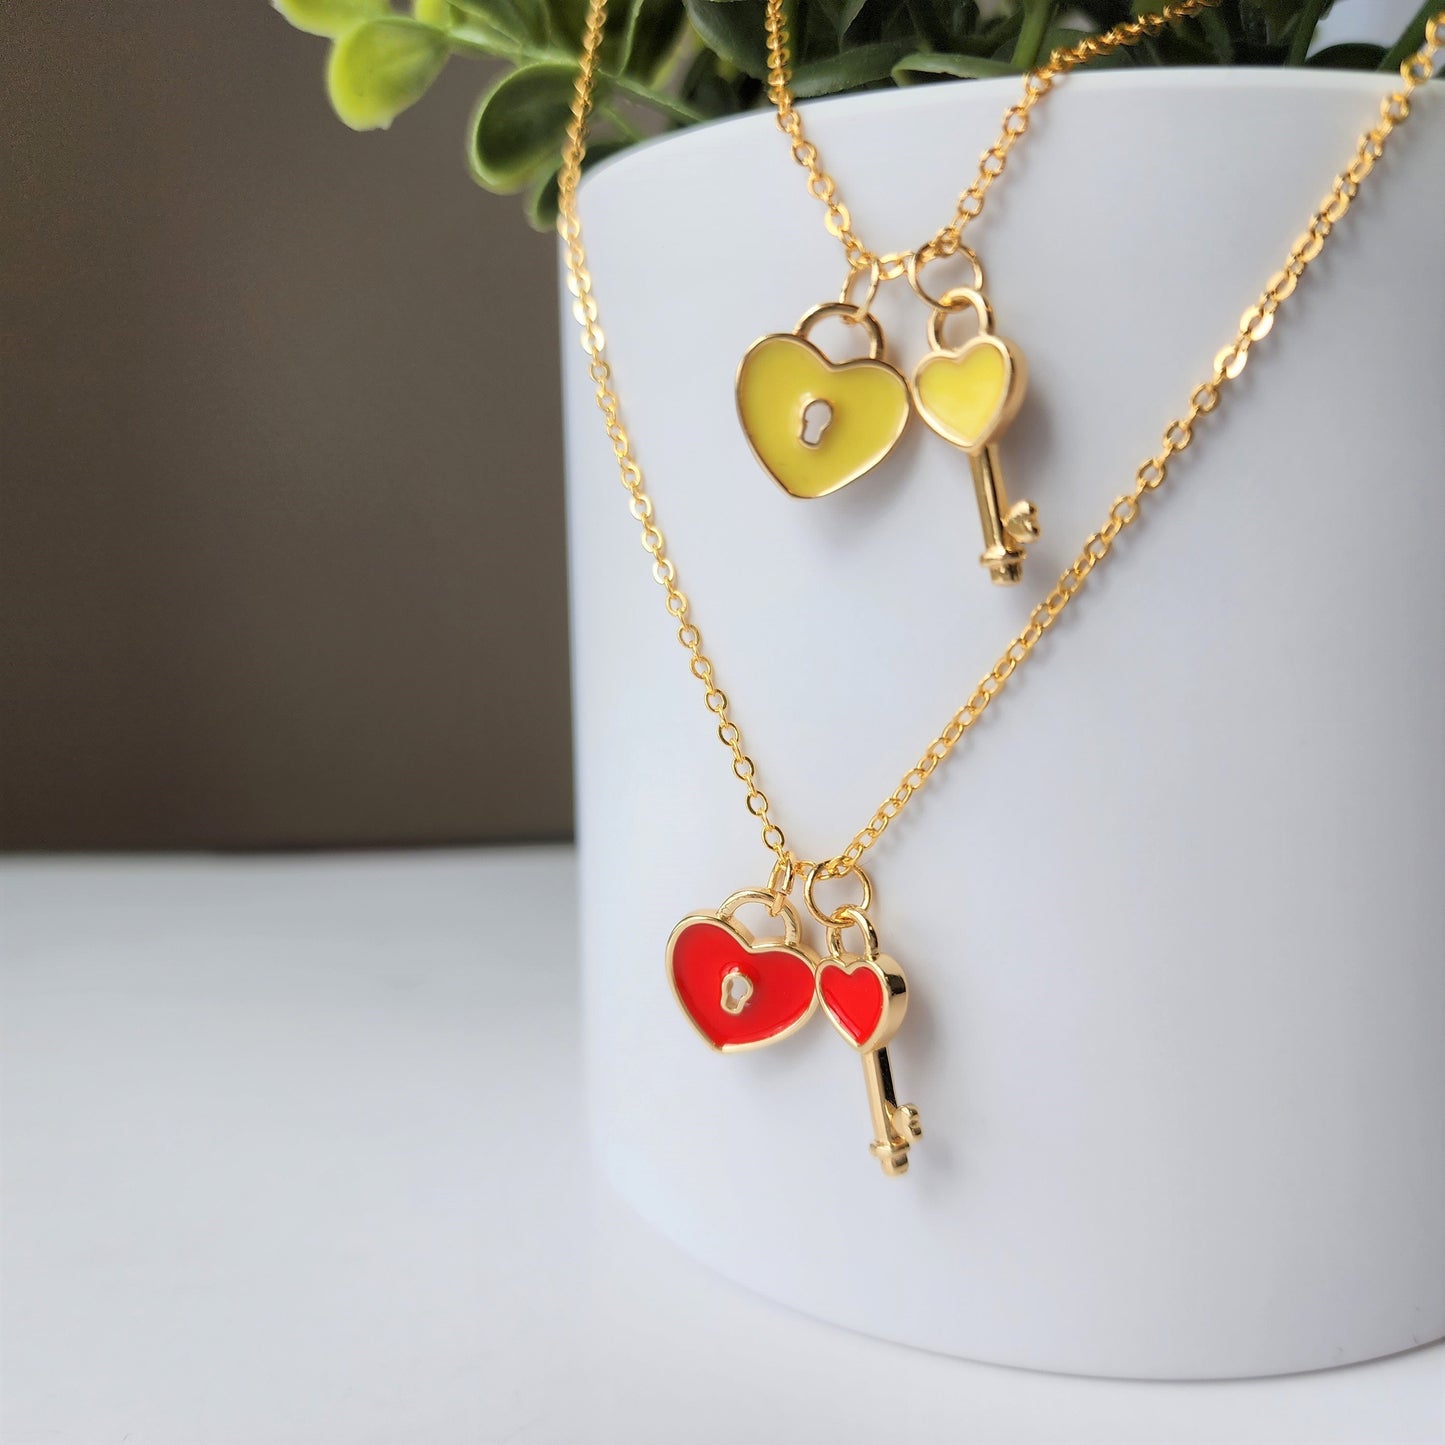 Red Heart Necklace, Love Heart lock and Key Gold Necklace,Bridesmaid Gift, Bridal Shower Gift, Flower Girl Necklace, Birthday Gift